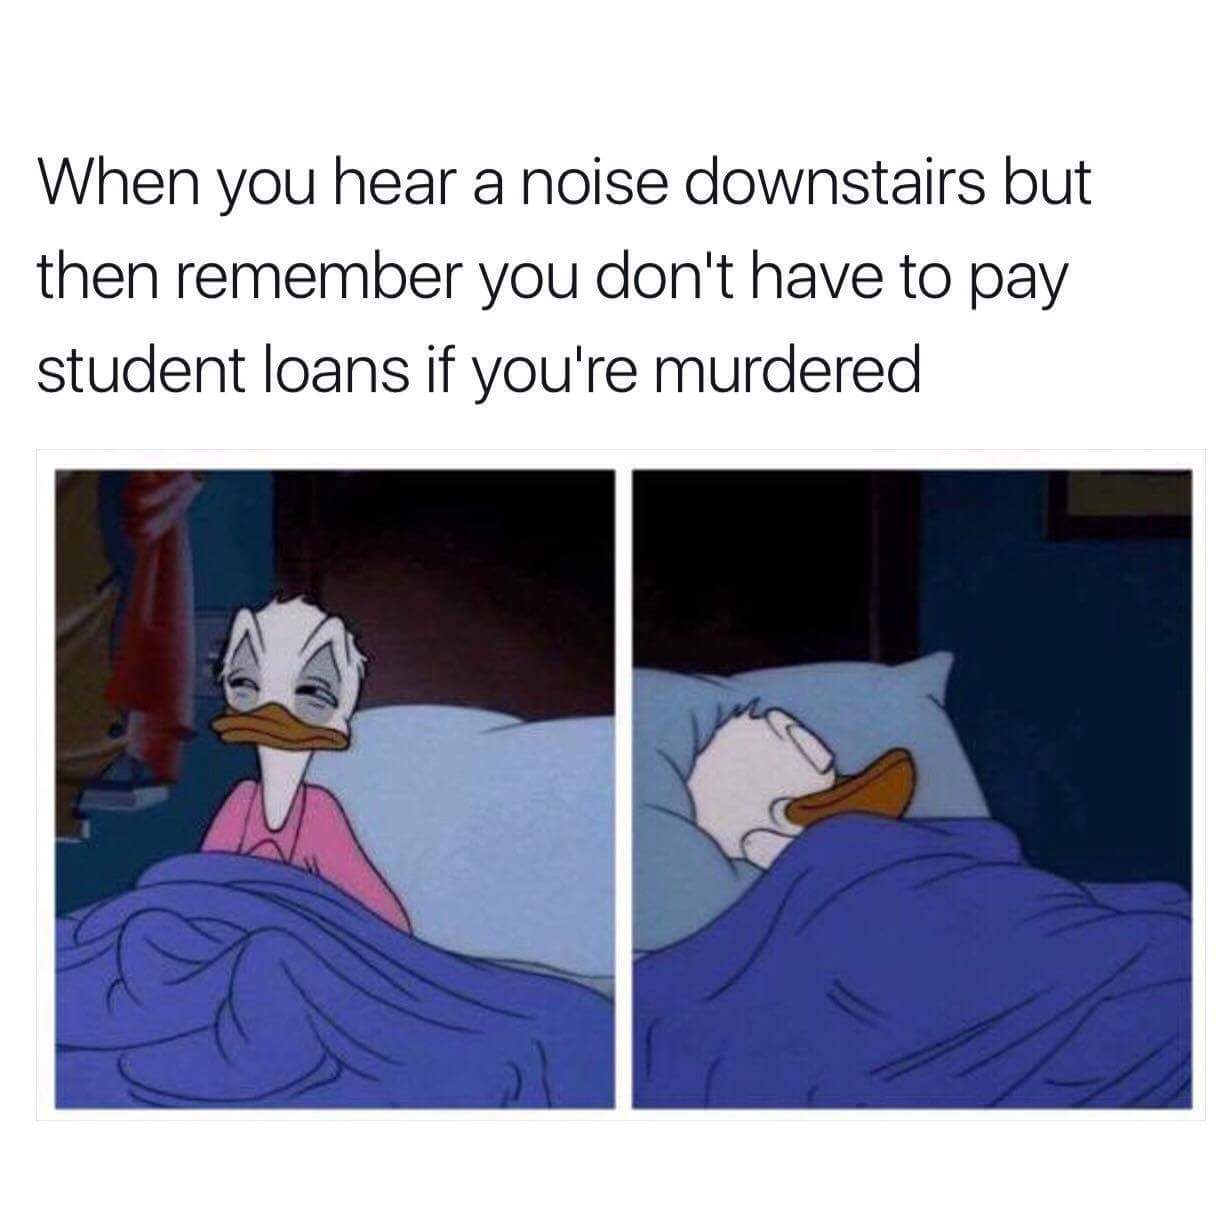 you hear something go bump - When you hear a noise downstairs but then remember you don't have to pay student loans if you're murdered